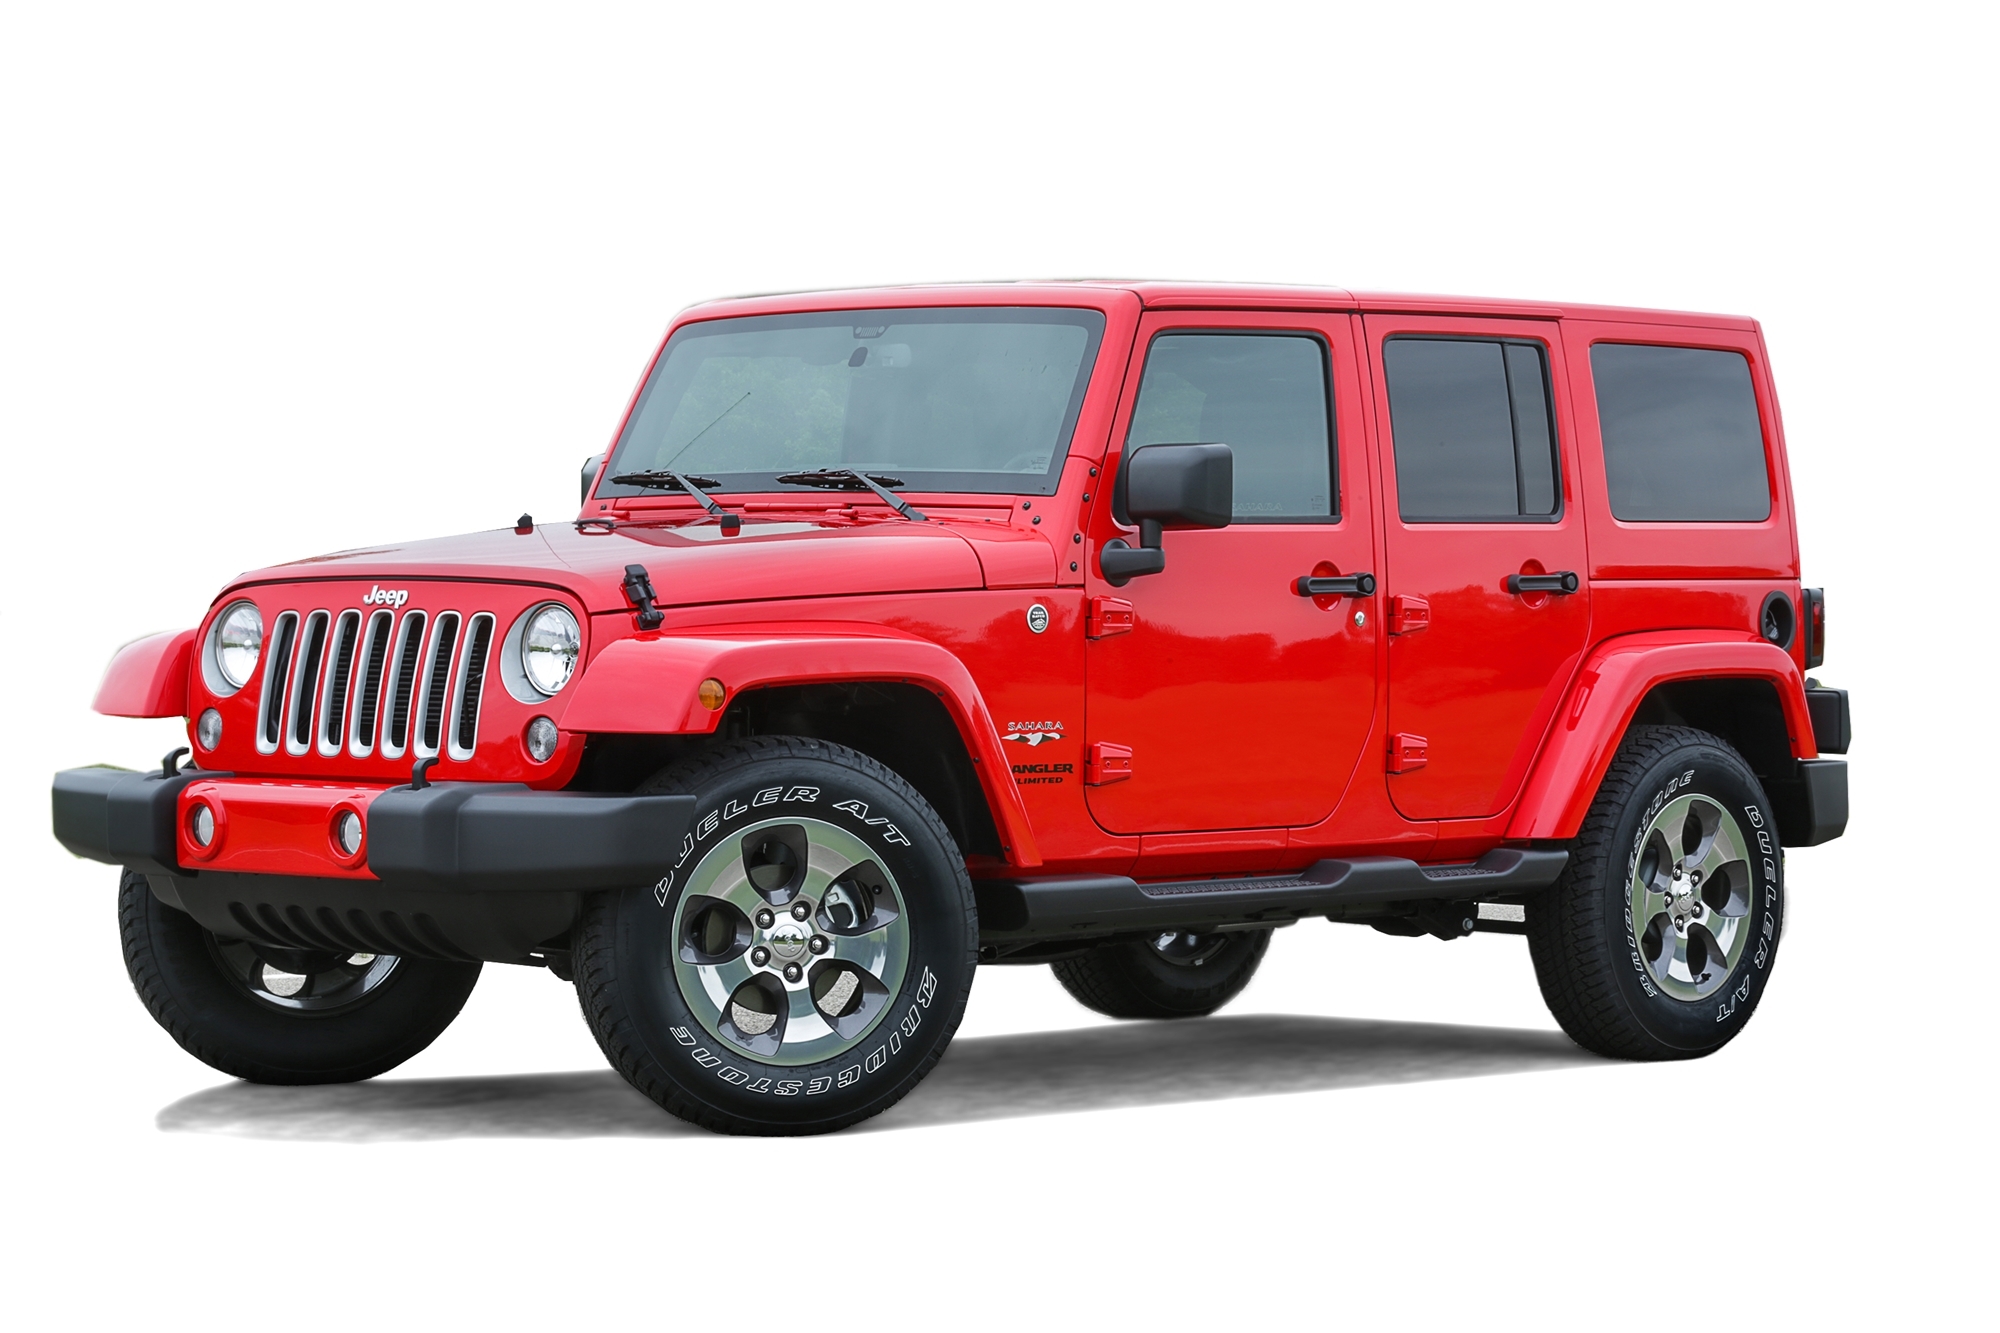 2016 Jeep Wrangler Unlimited Sport RHD Full Specs, Features and Price |  CarBuzz